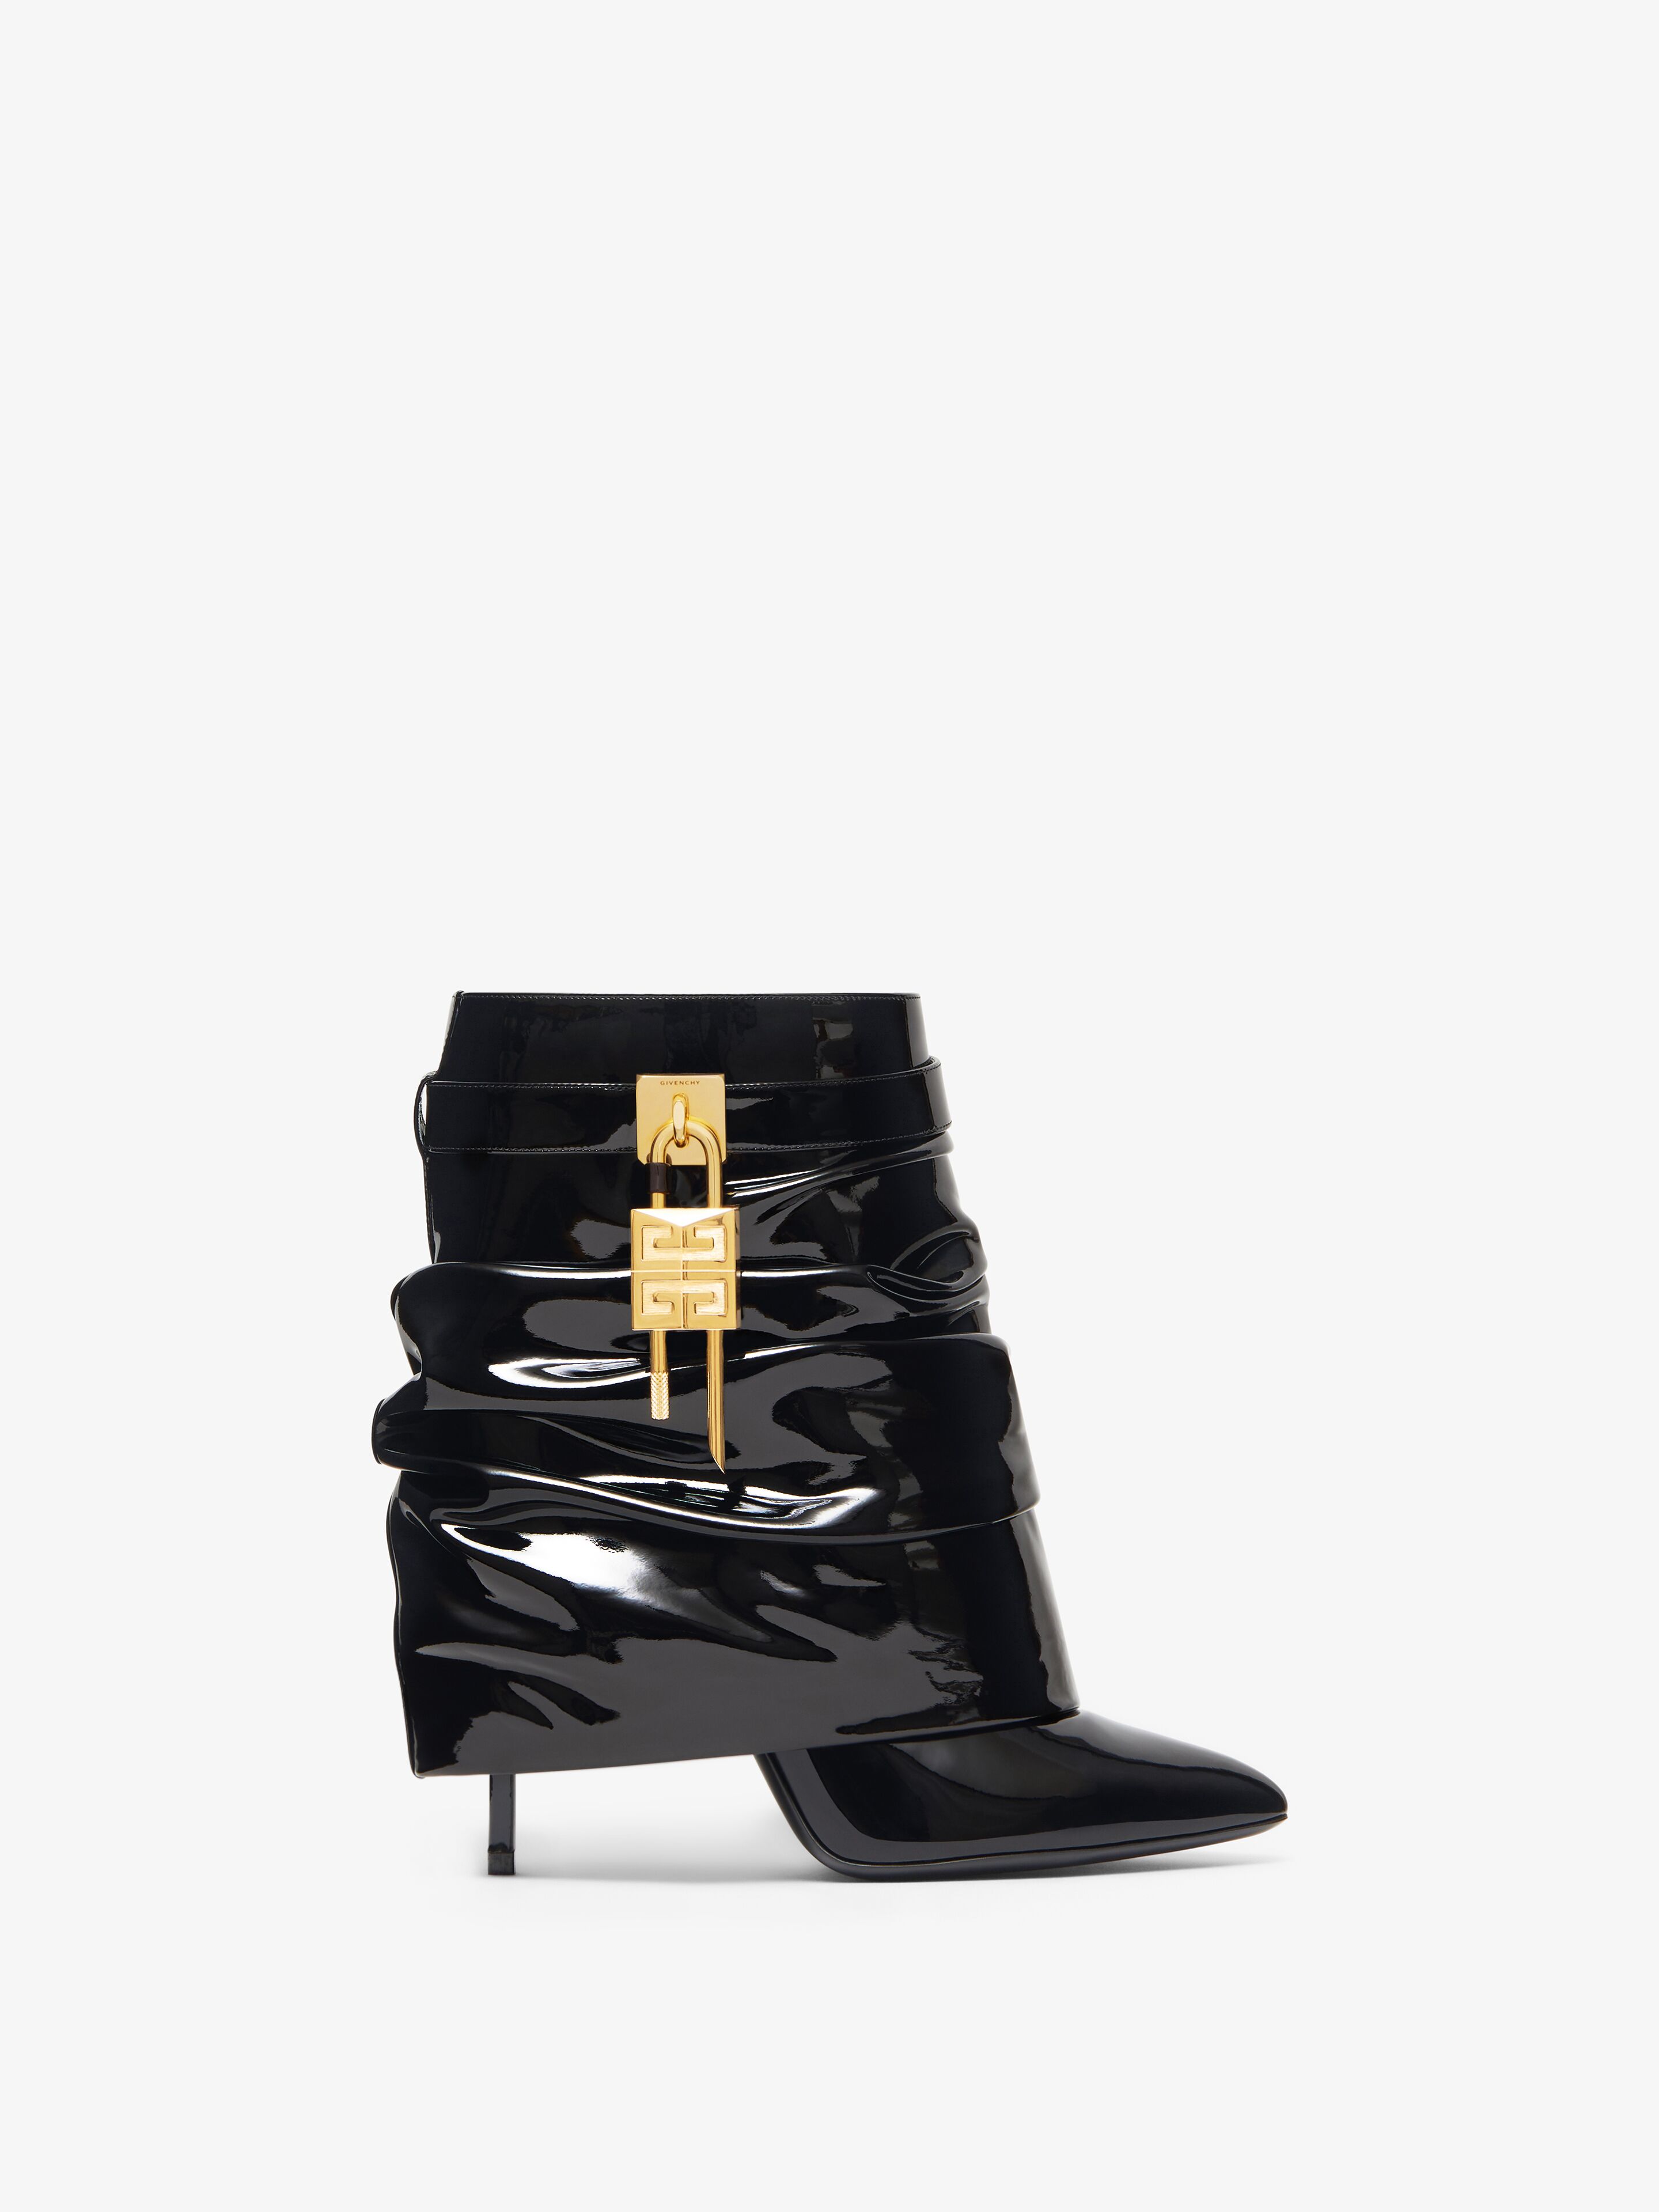 Women's Luxury Designer Shoes | Rubber u0026 Leather Shoes | GIVENCHY US